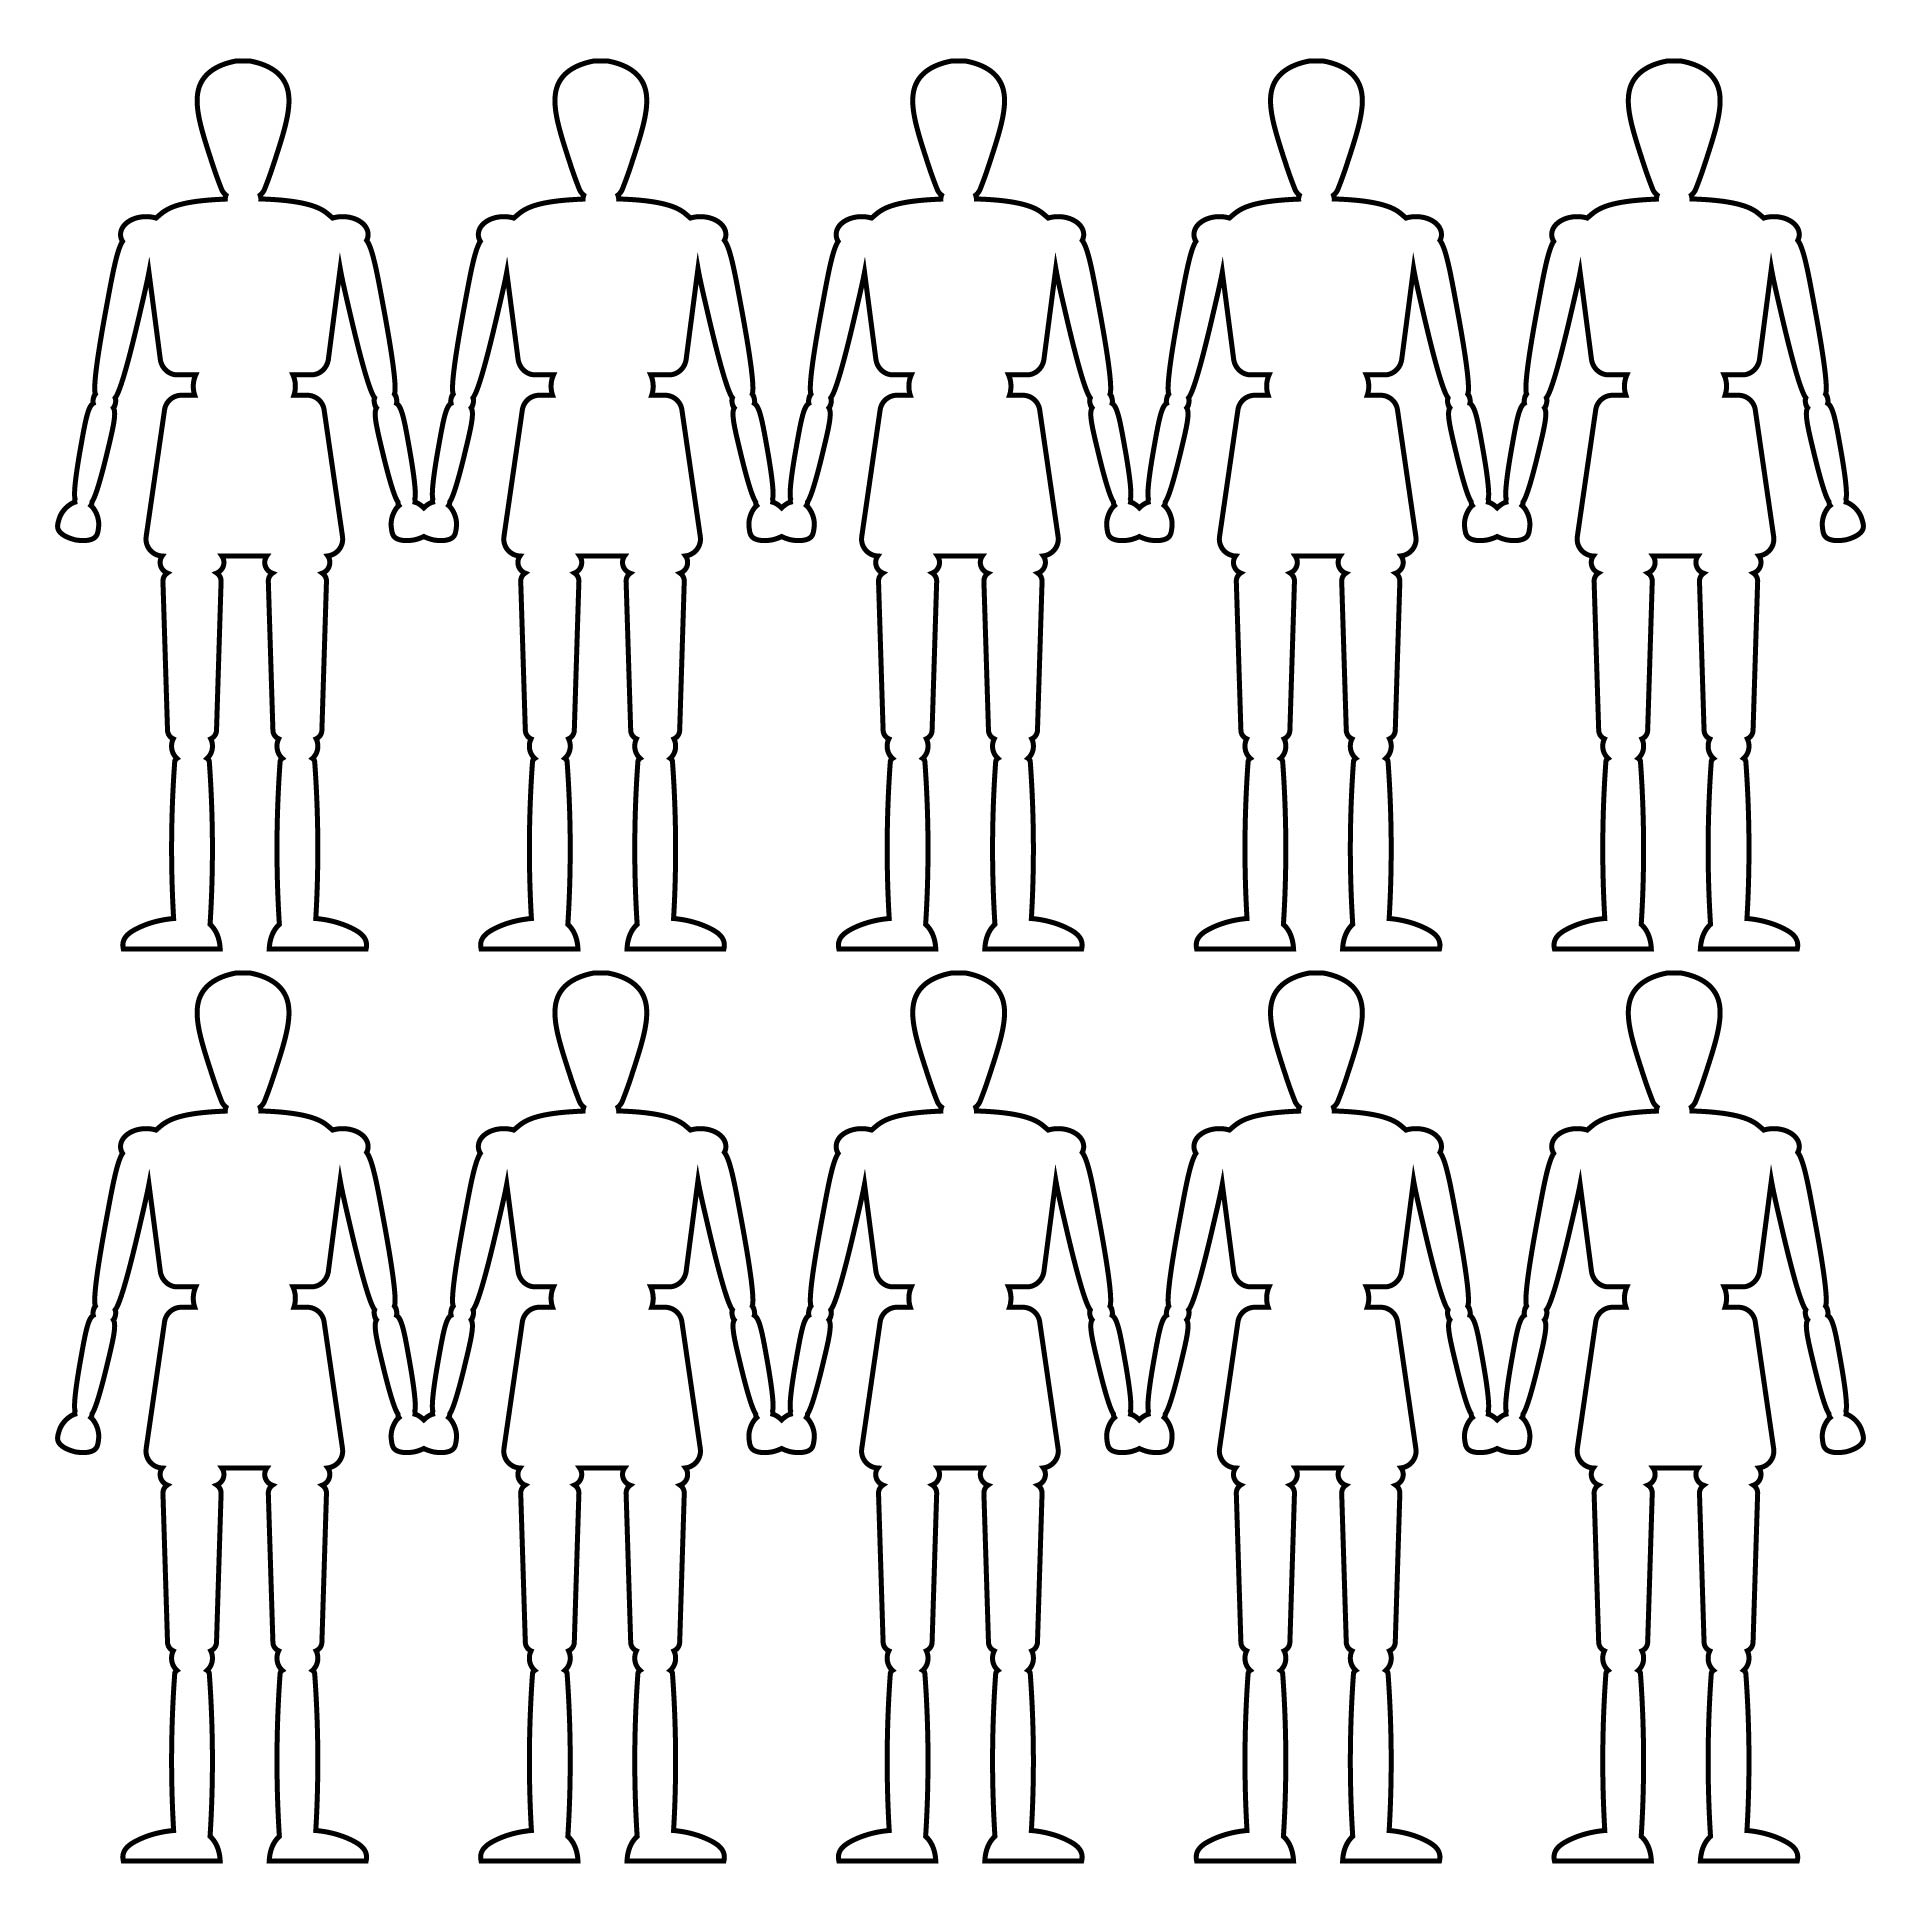 10 Best Images of Printable Cutouts People Printable Paper People Cutouts, Free Printable